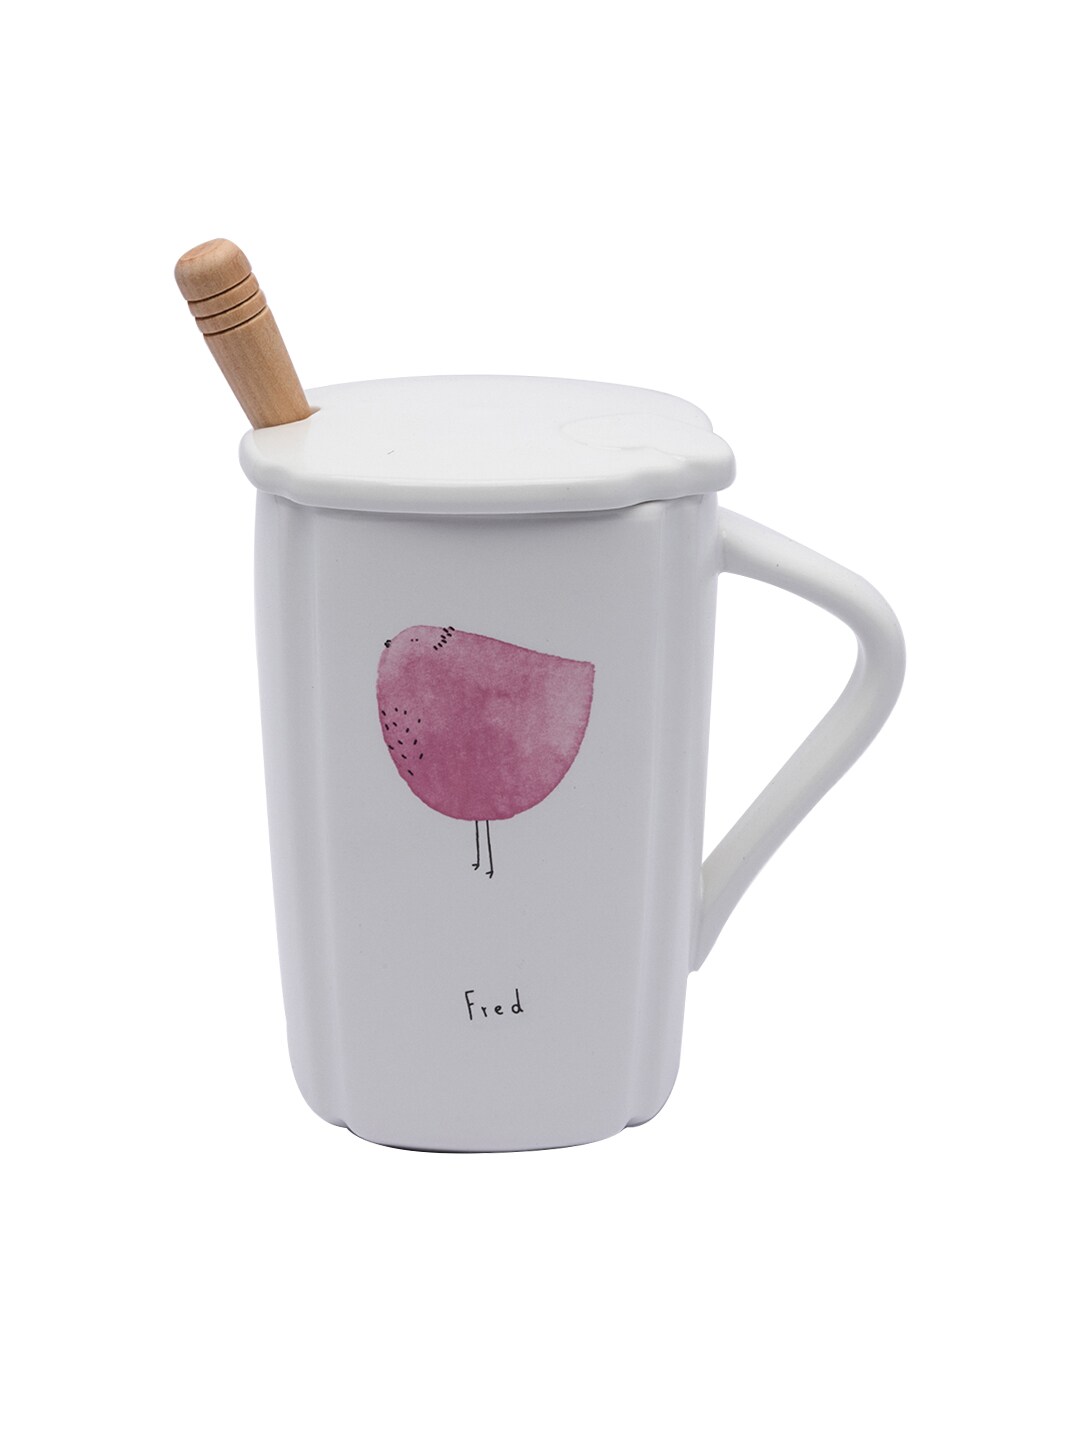 MARKET99 White & Pink Printed Ceramic Matte Coffee Cup Price in India